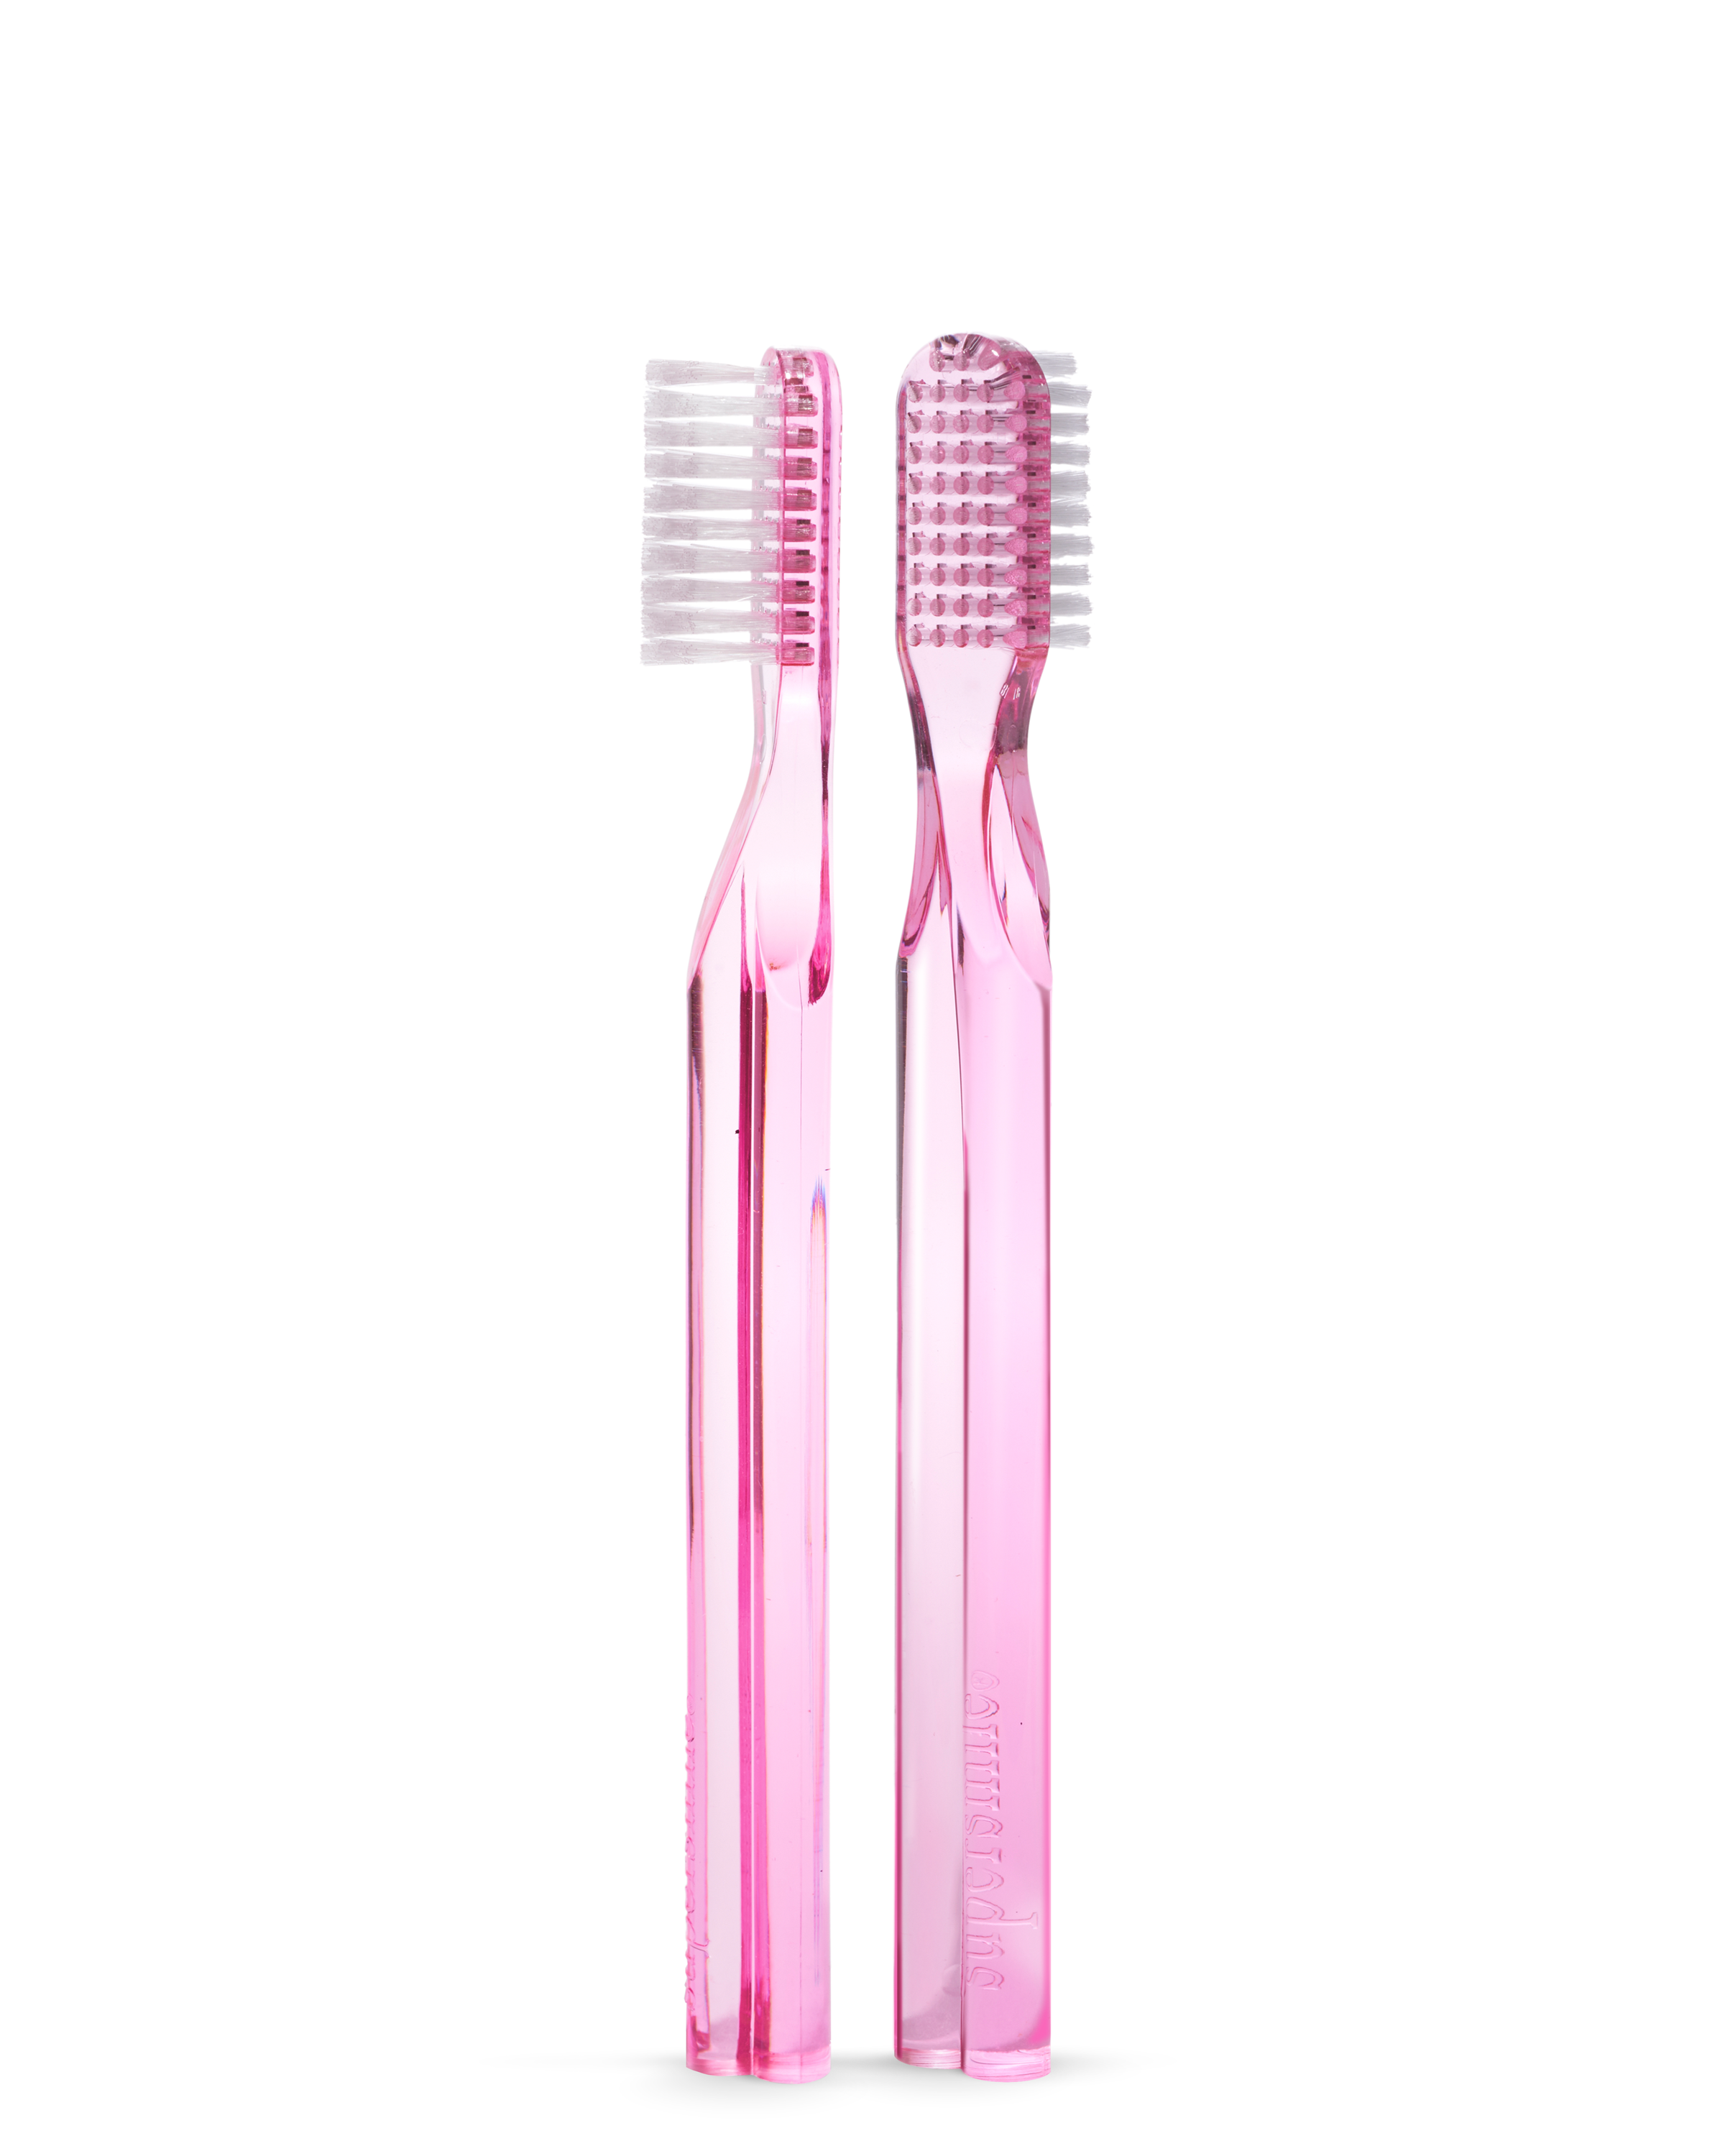 New Generation 45° Pink Toothbrushes